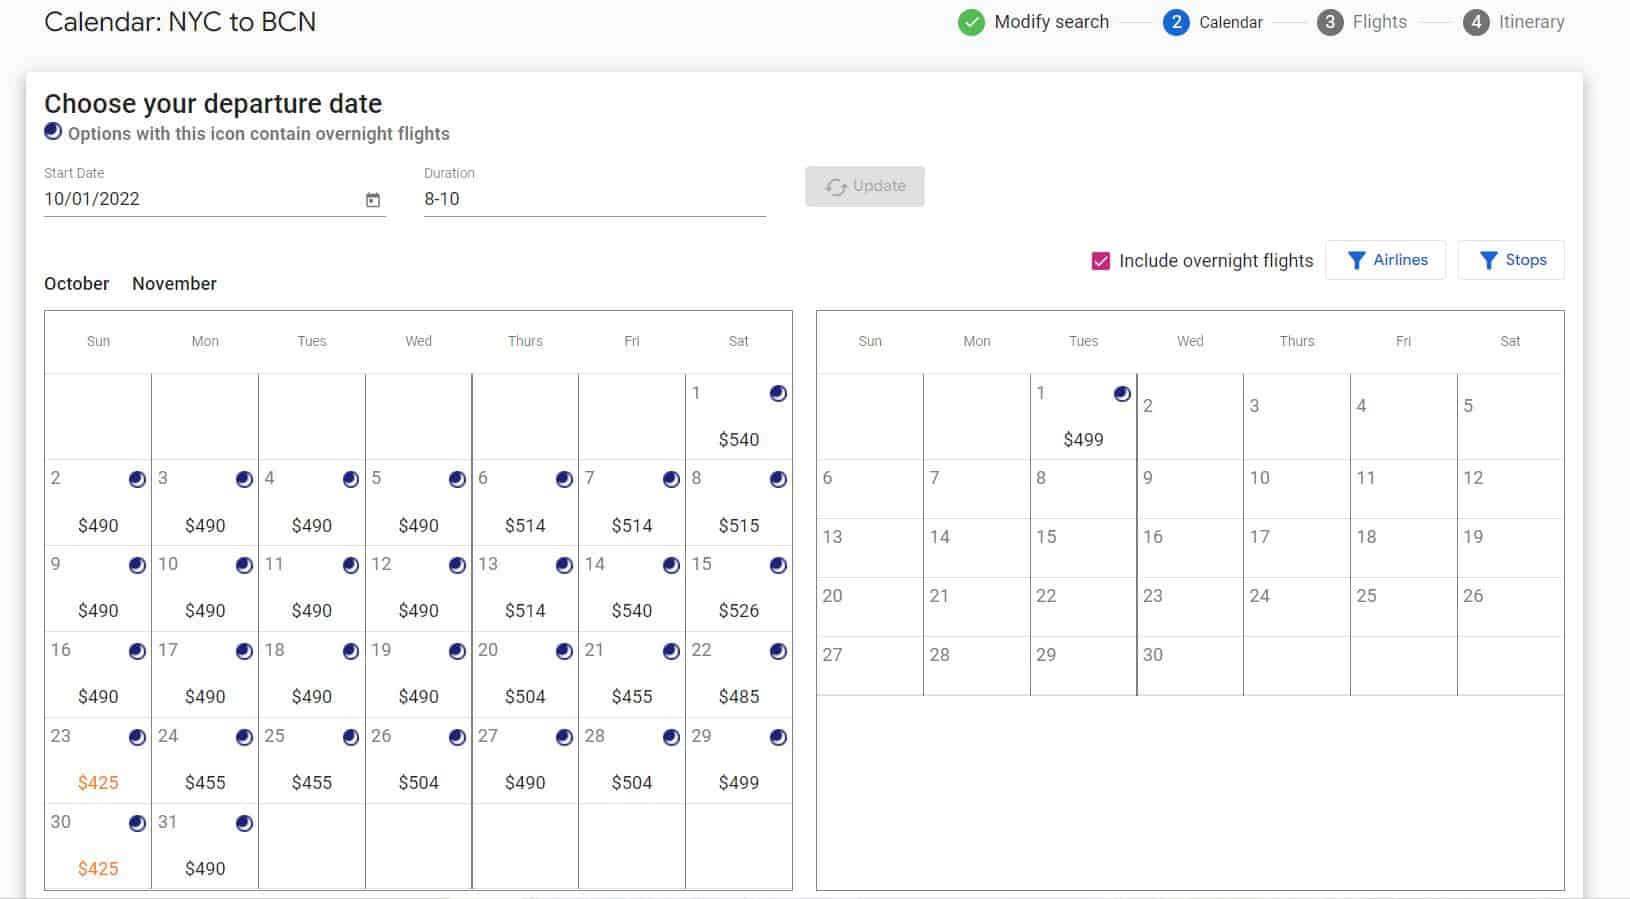 Screenshot of calendar view of flight prices from NYC to Barcelona on the ITA Matrix website.